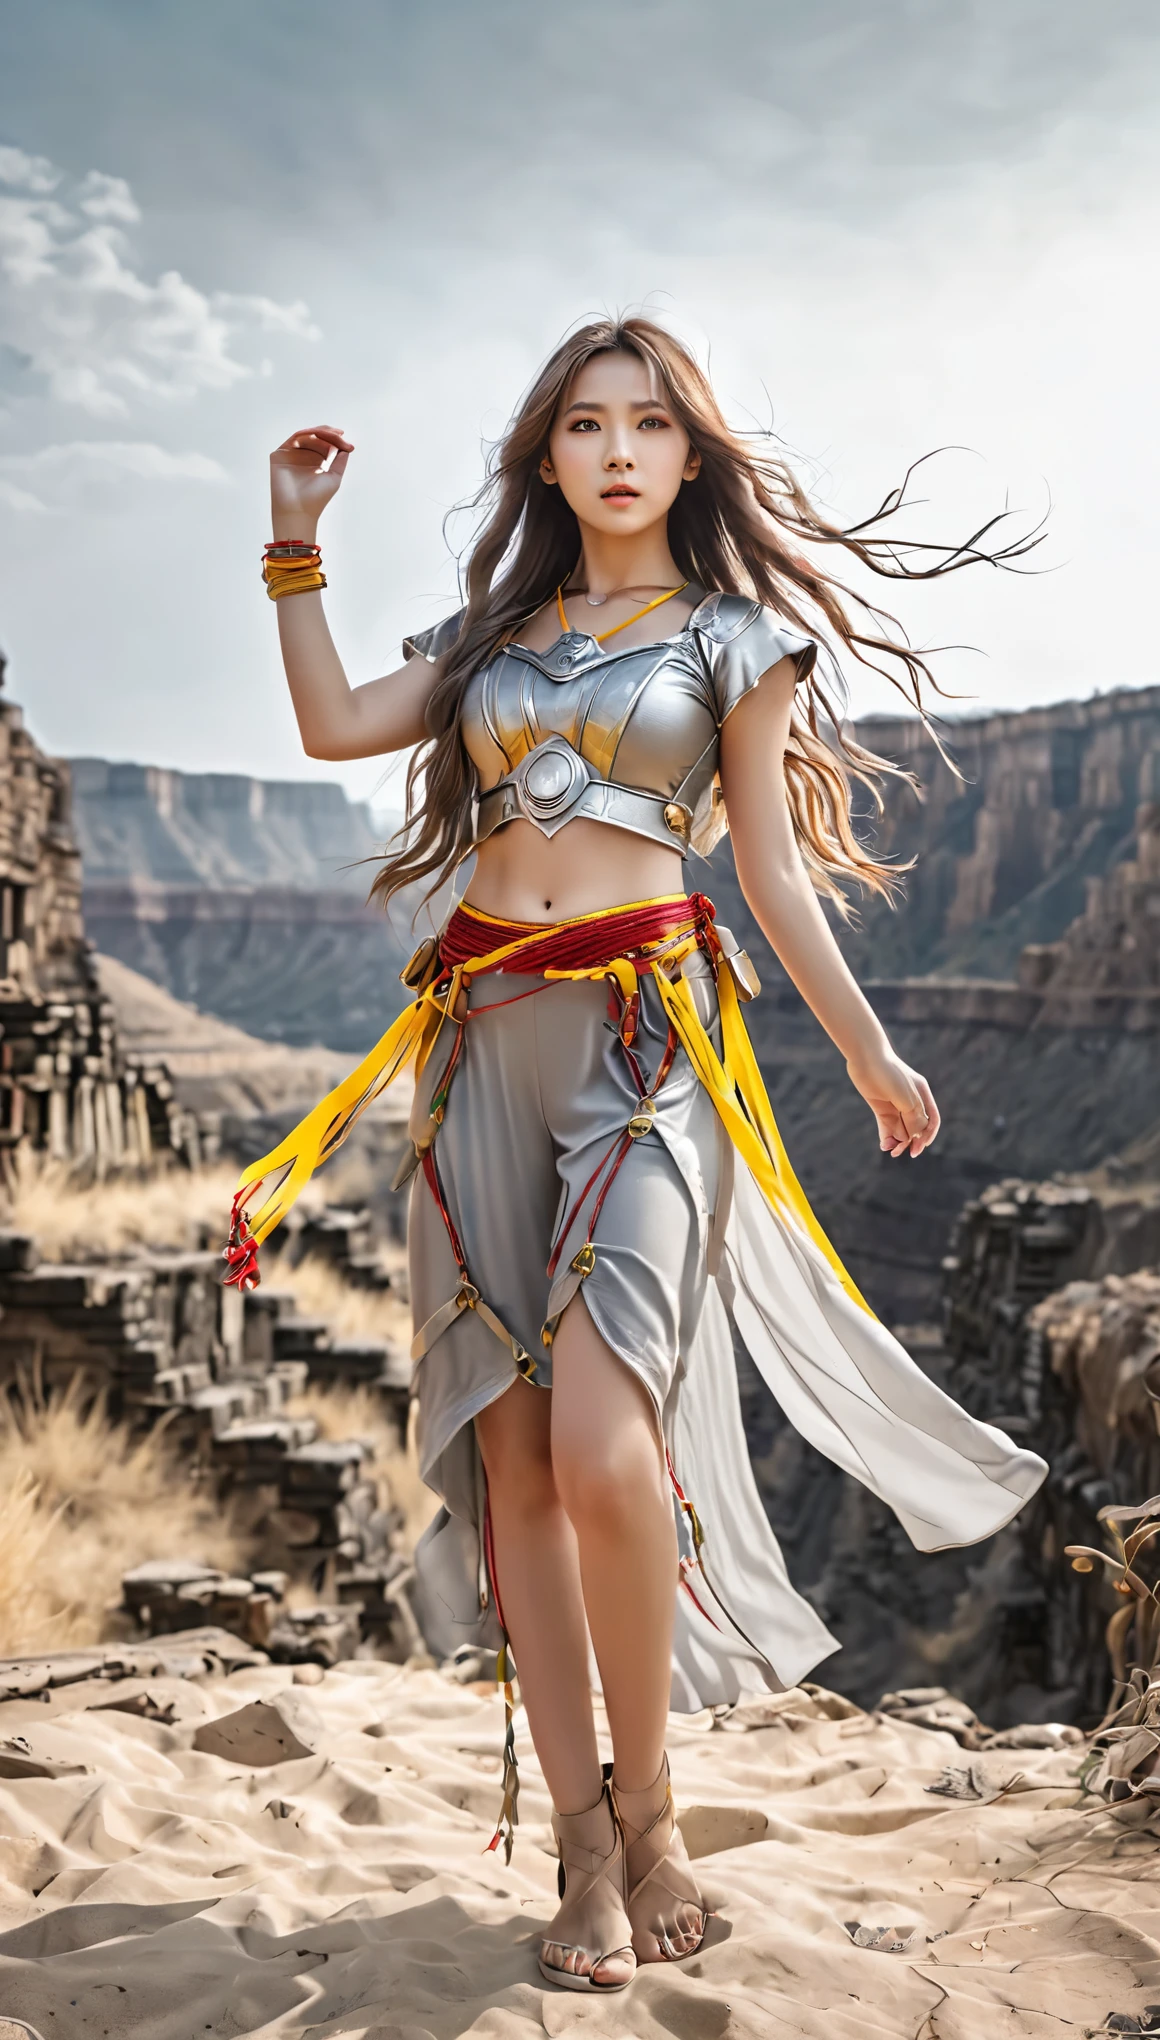 Bright Shot:1.3)A lone girl raider dressed in a spectacular realistic costume、Standing triumphantly with one hand raised、Her yellow eyes shine in the soft film light。Light grey non-transparent short sleeve top、It features an intricate design and transparent fabric at the waist.、You can see the red string strap.。Her long wavy hair cascading down her back、Fluttering in the wind。Aesthetically speaking、The scene is set in a wasteland and a canyon.、In the background there are ruins and n ruins。Bright shots、Adobe Lightroom、HDR、and enhanced using darkroom techniques、Increasing complexity